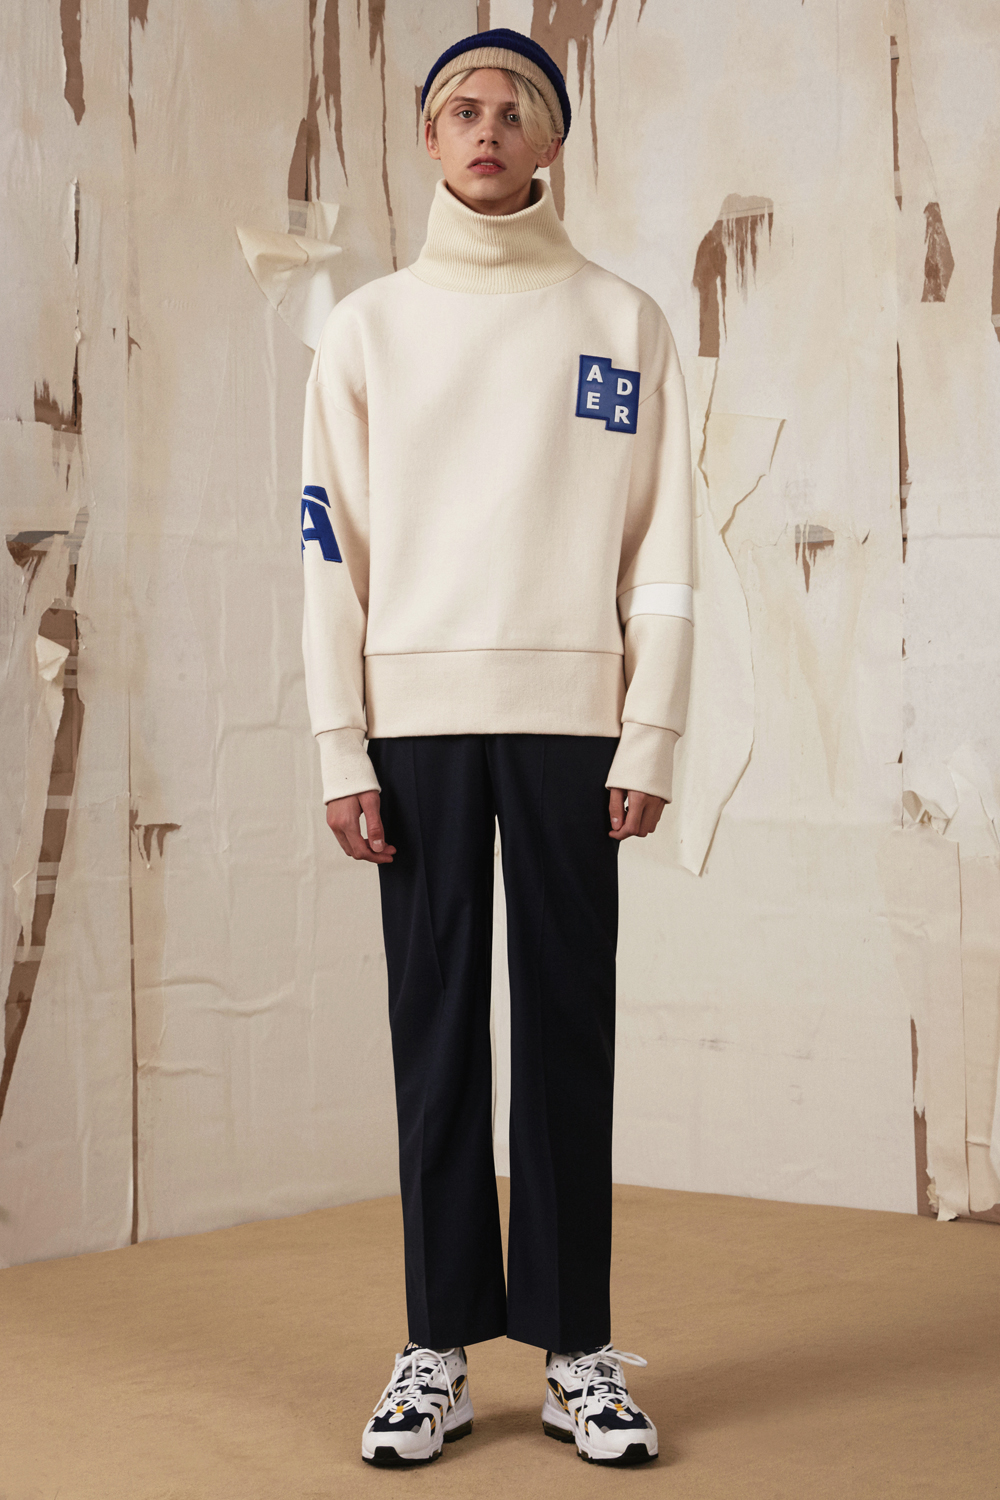 PAUSE Meets: ADER ERROR – PAUSE Online | Men's Fashion, Street Style ...